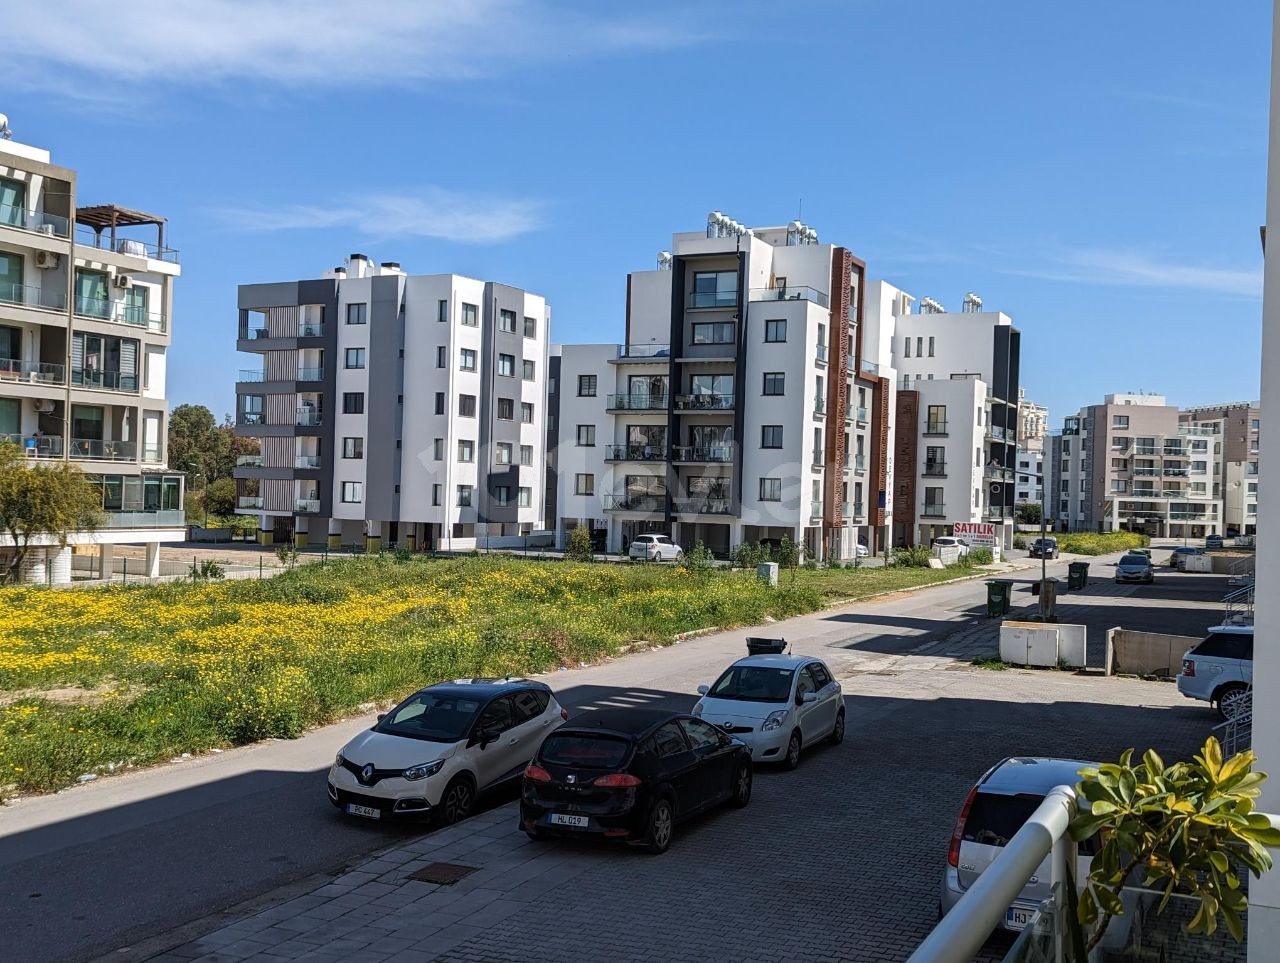 LEFKOŞA DEREBOYUNDA, TURKISH COB, HIGH PREFERENCE RATE AND VERY GOOD LOCATION, 135 SQUARE METERS, 3+1, GUEST TOILET AND ADDITIONAL TWO SHOWER-TOILET, 1ST FLOOR ABOVE THE COLUMN, ELEVATOR, SPACIOUS, LUXURY APARTMENT